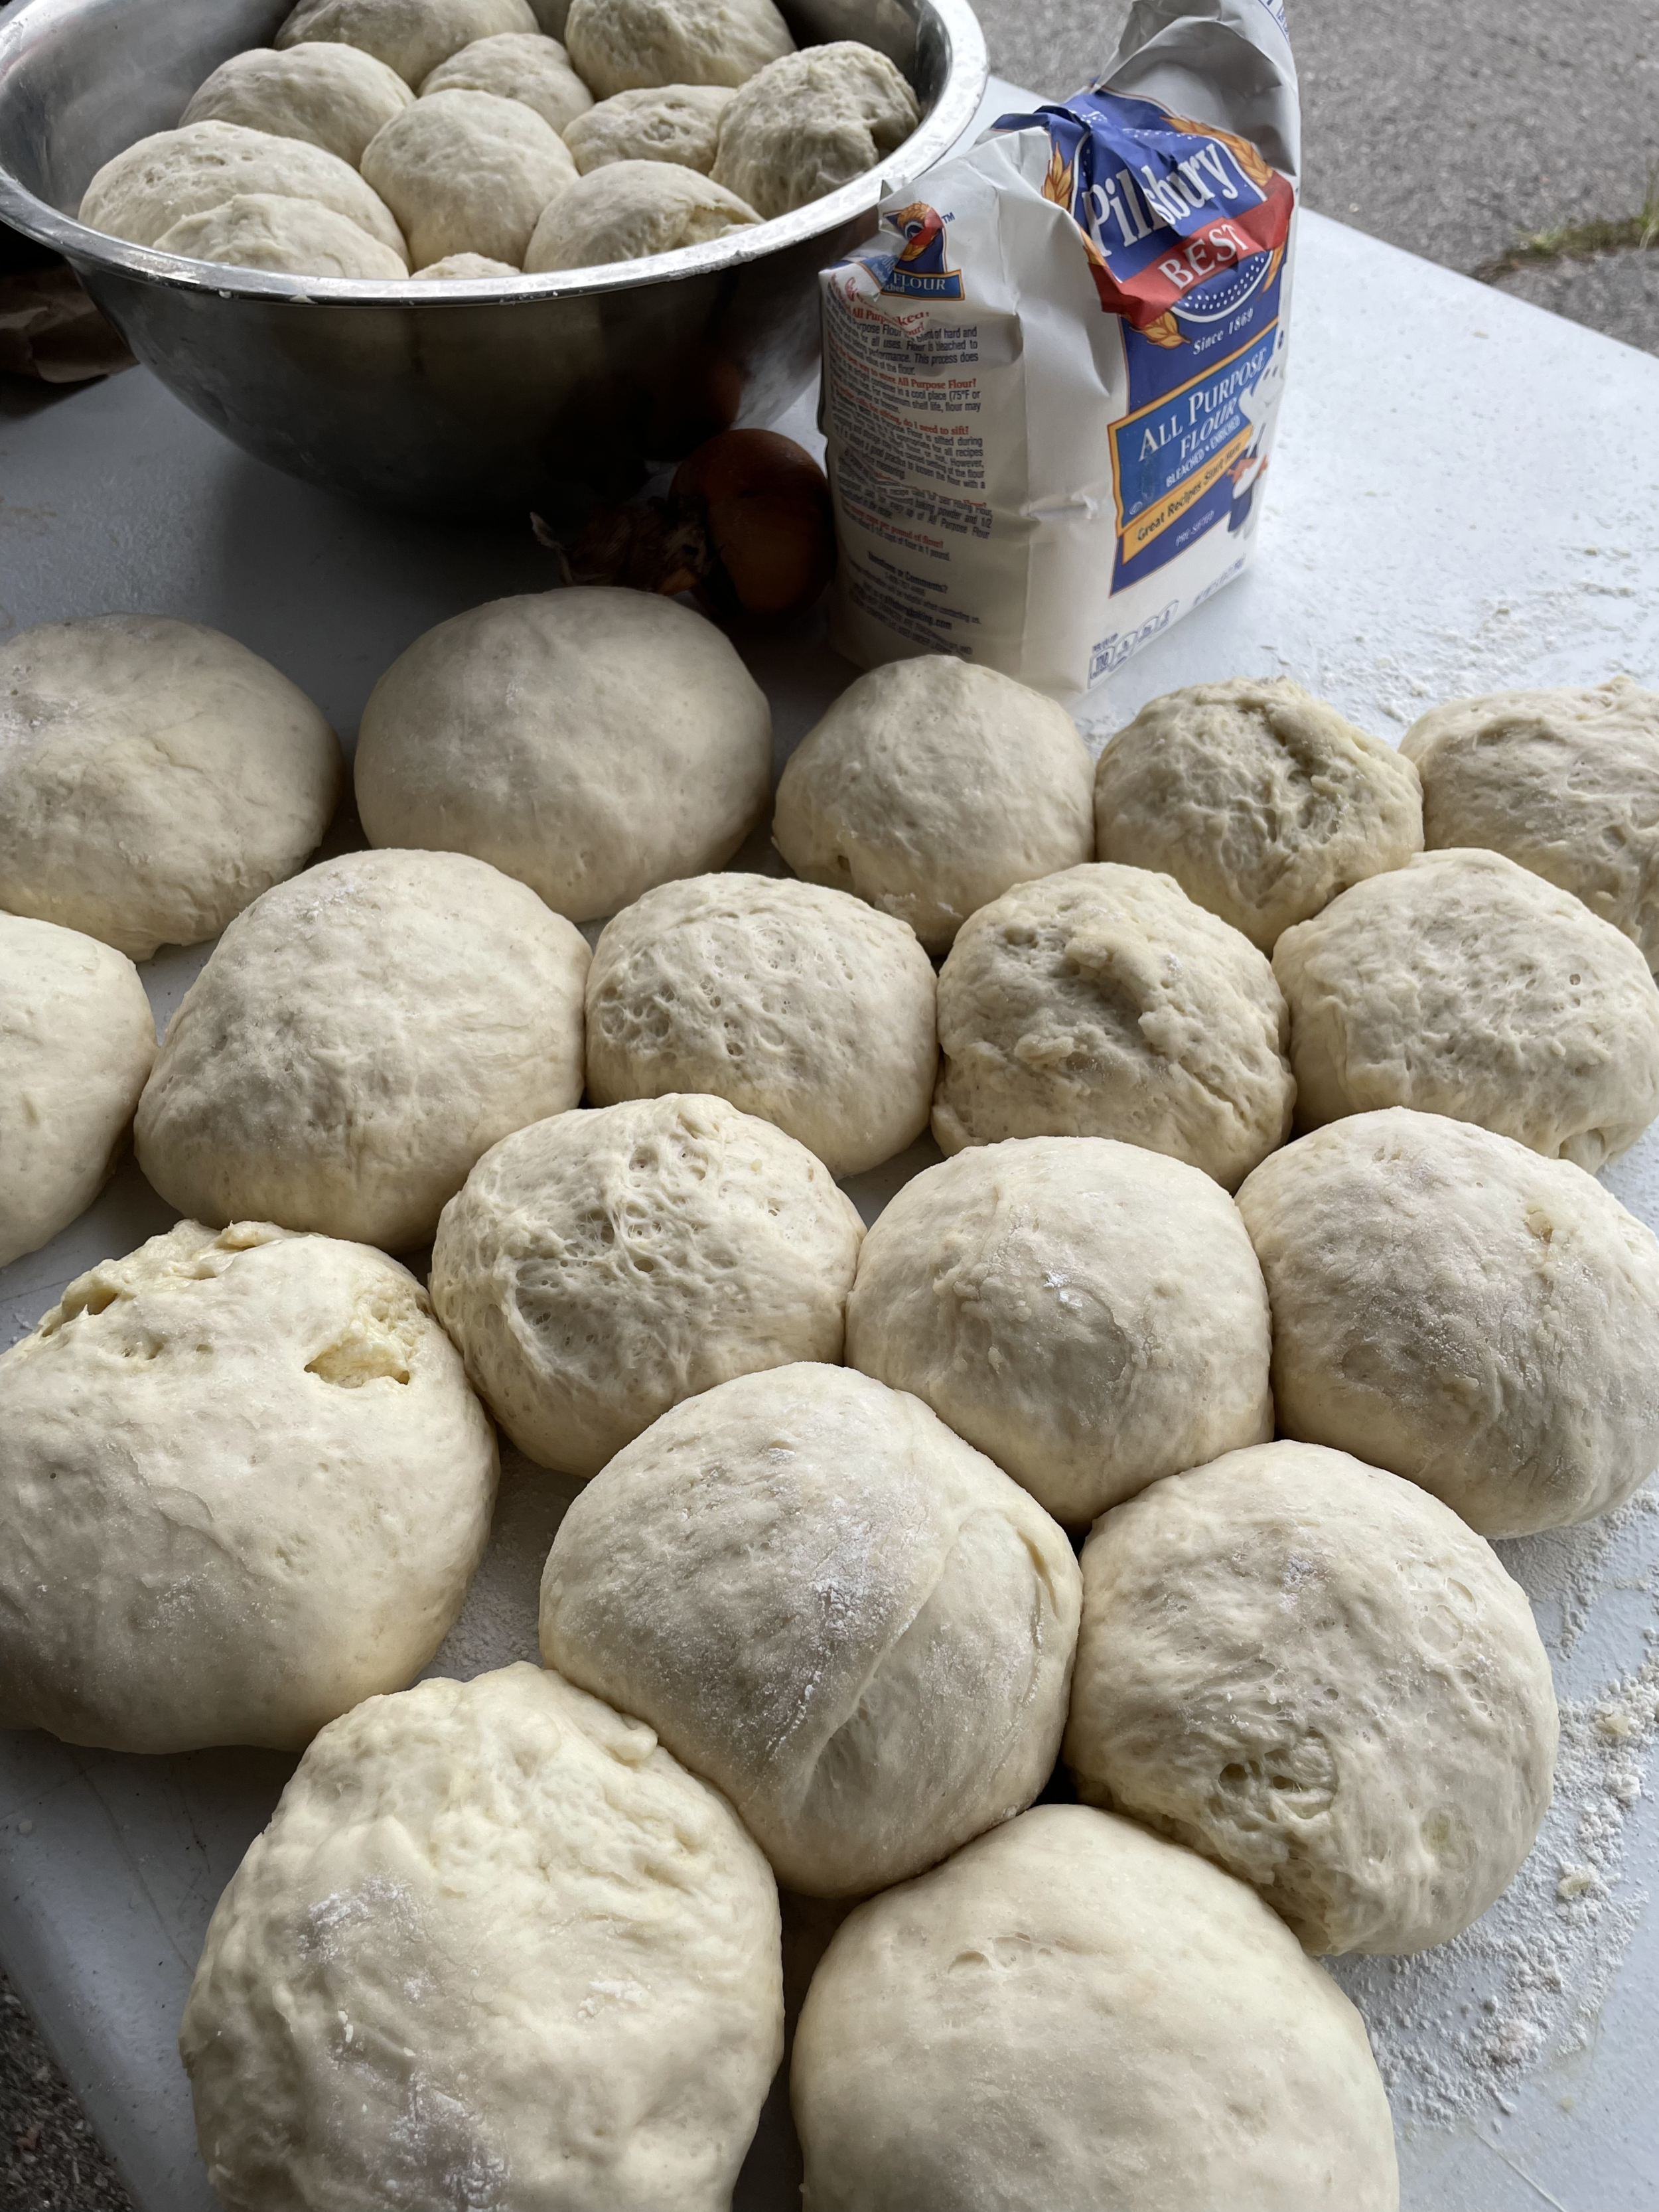 Pizza dough for the babies.